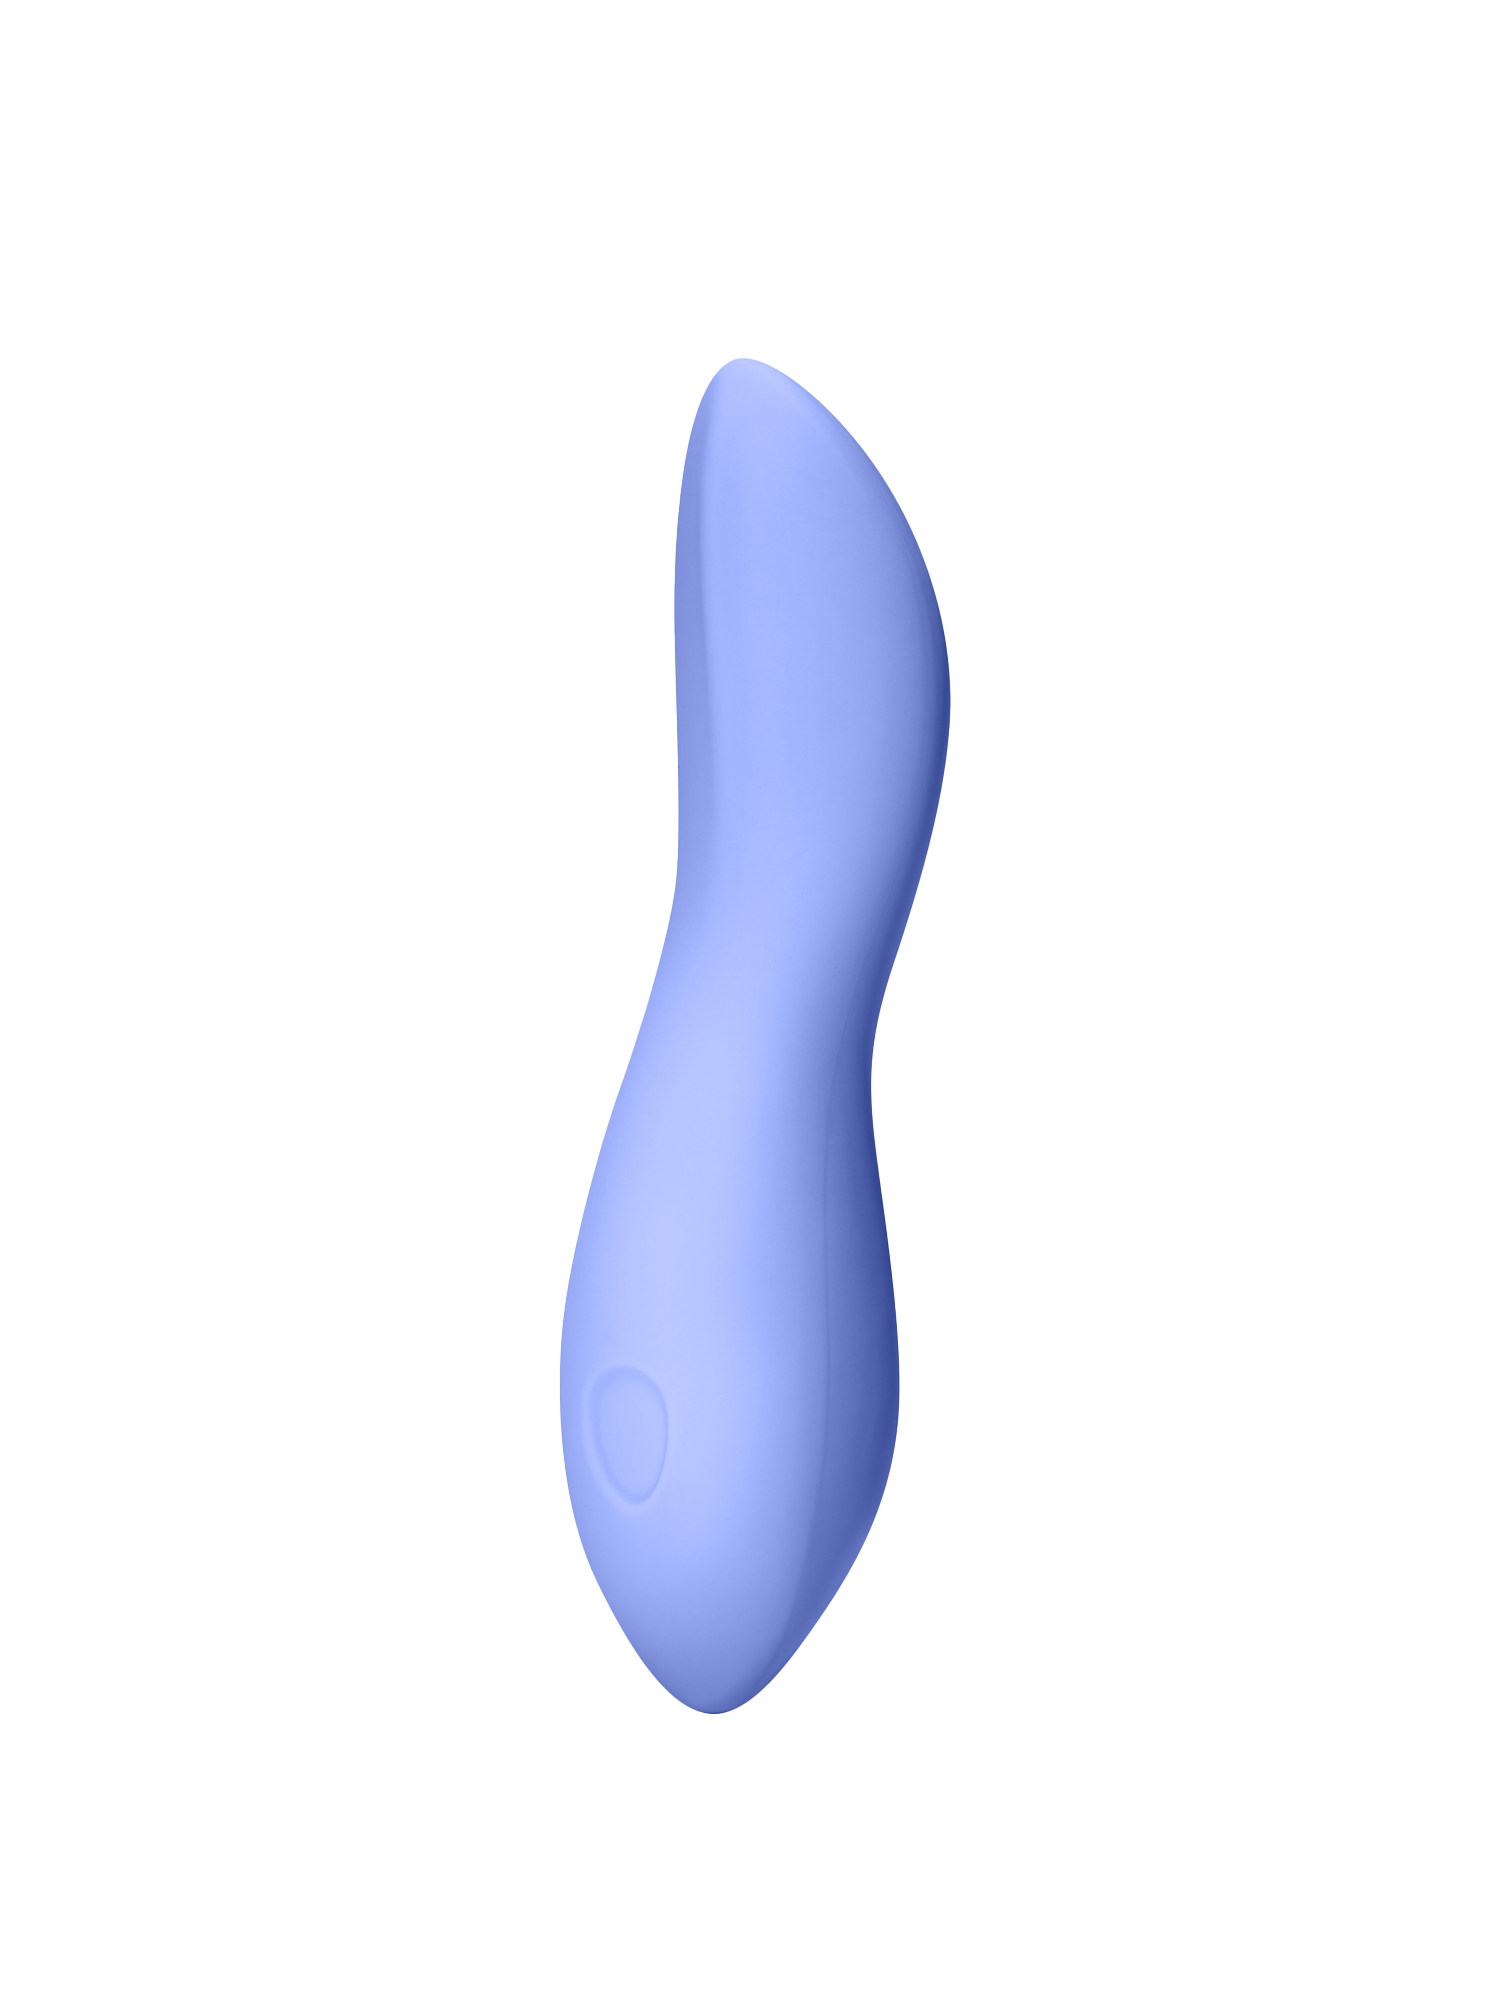 Periwinkle  | Seamless | Light blue vibrator at 45 degree angle, against off-white background